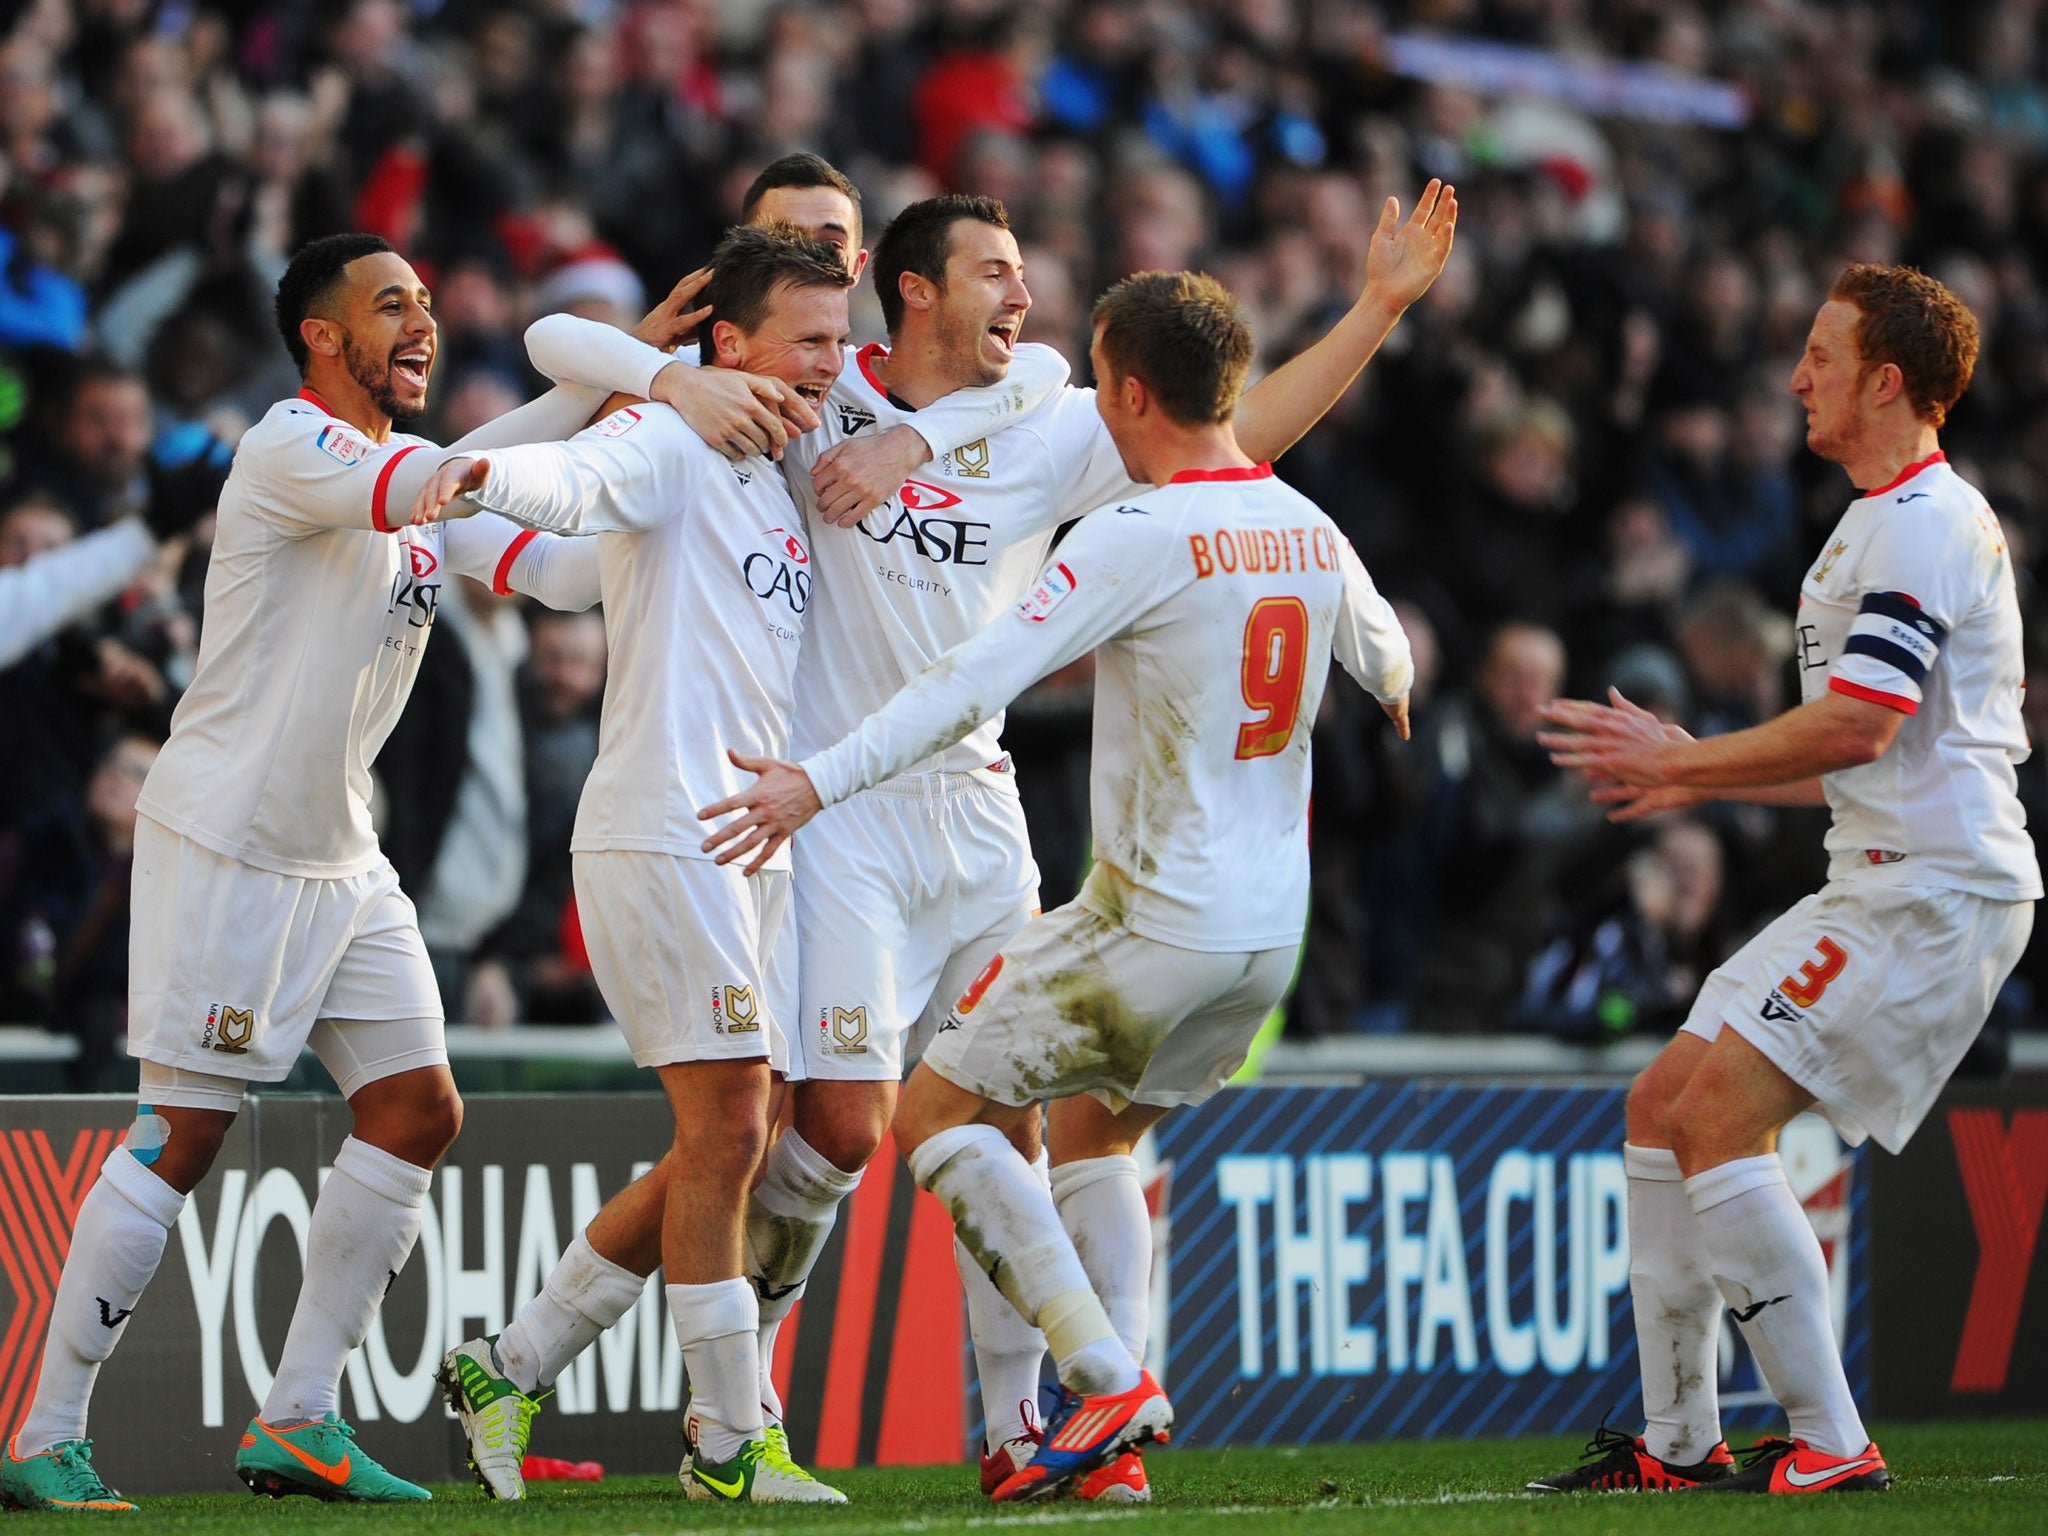 Stephen Gleeson of MK Dons celebrates with team mates as he scores their first goal of the match